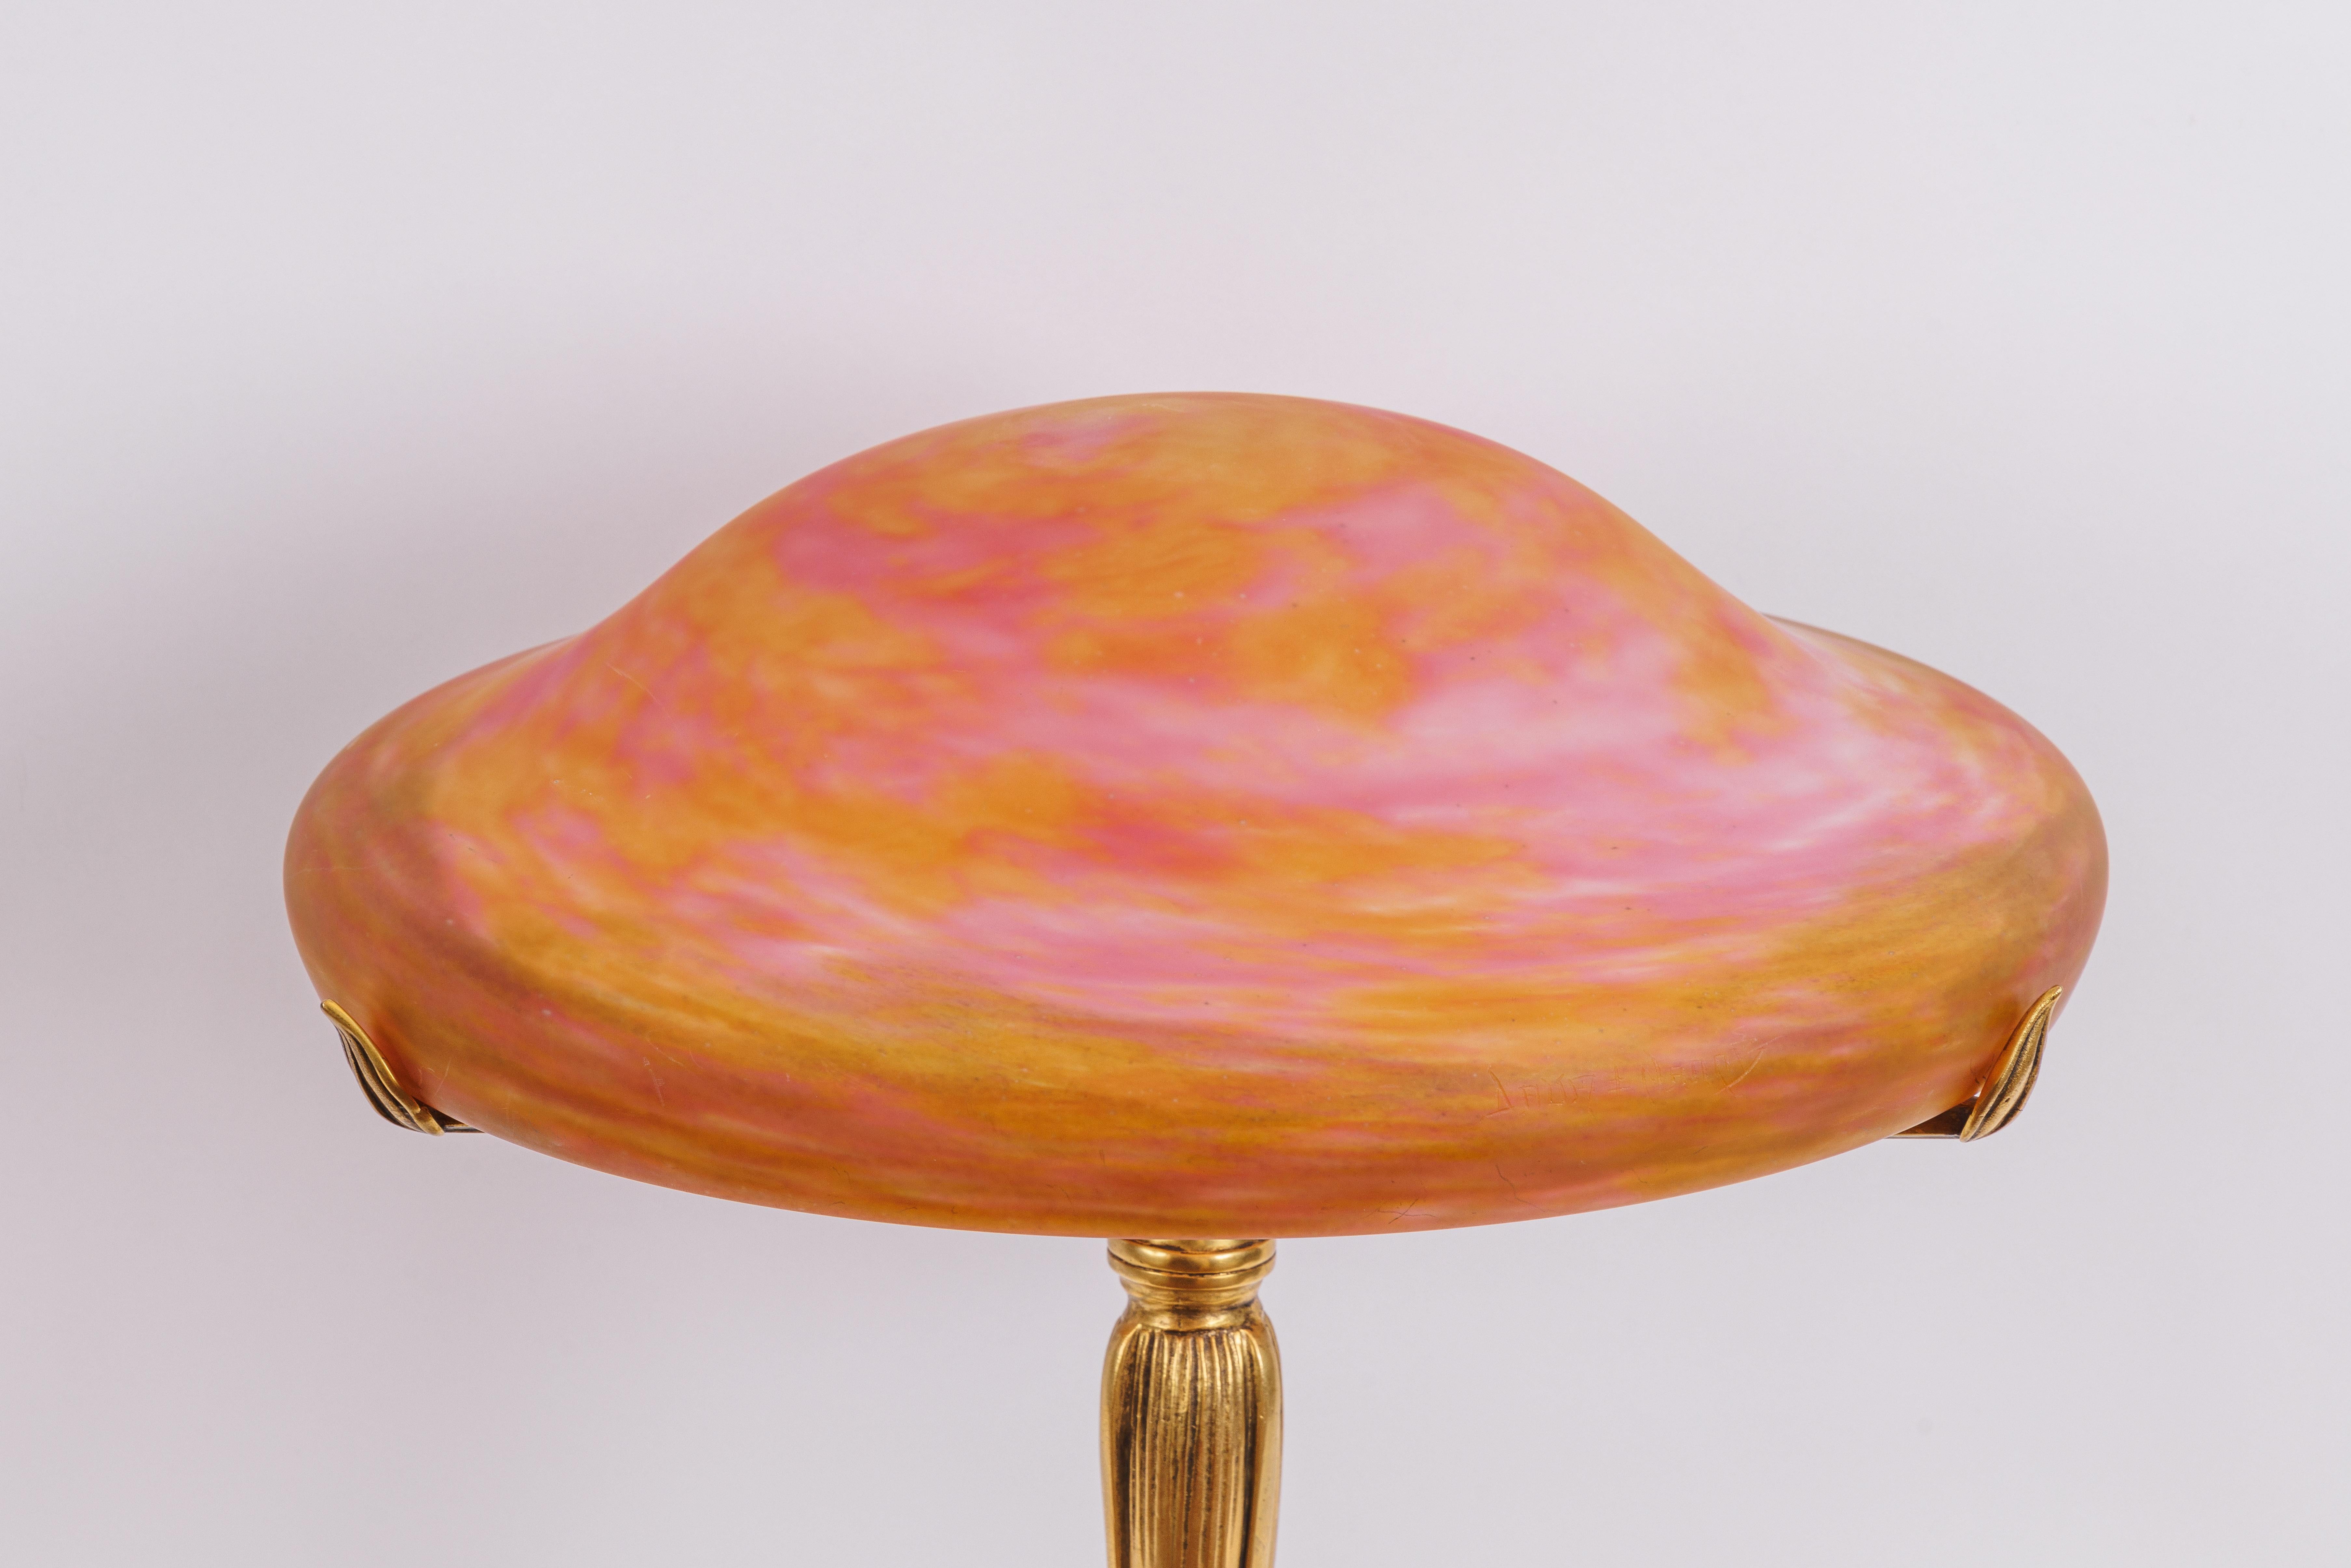 A Louis Majorelle and Daum Nancy Gilt Bronze and Pink Glass Table Lamp, Circa 1900

Introducing an exquisite piece of Art Nouveau mastery – the Louis Majorelle and Daum Nancy Gilt Bronze and Pink Glass Table Lamp, a timeless treasure hailing from